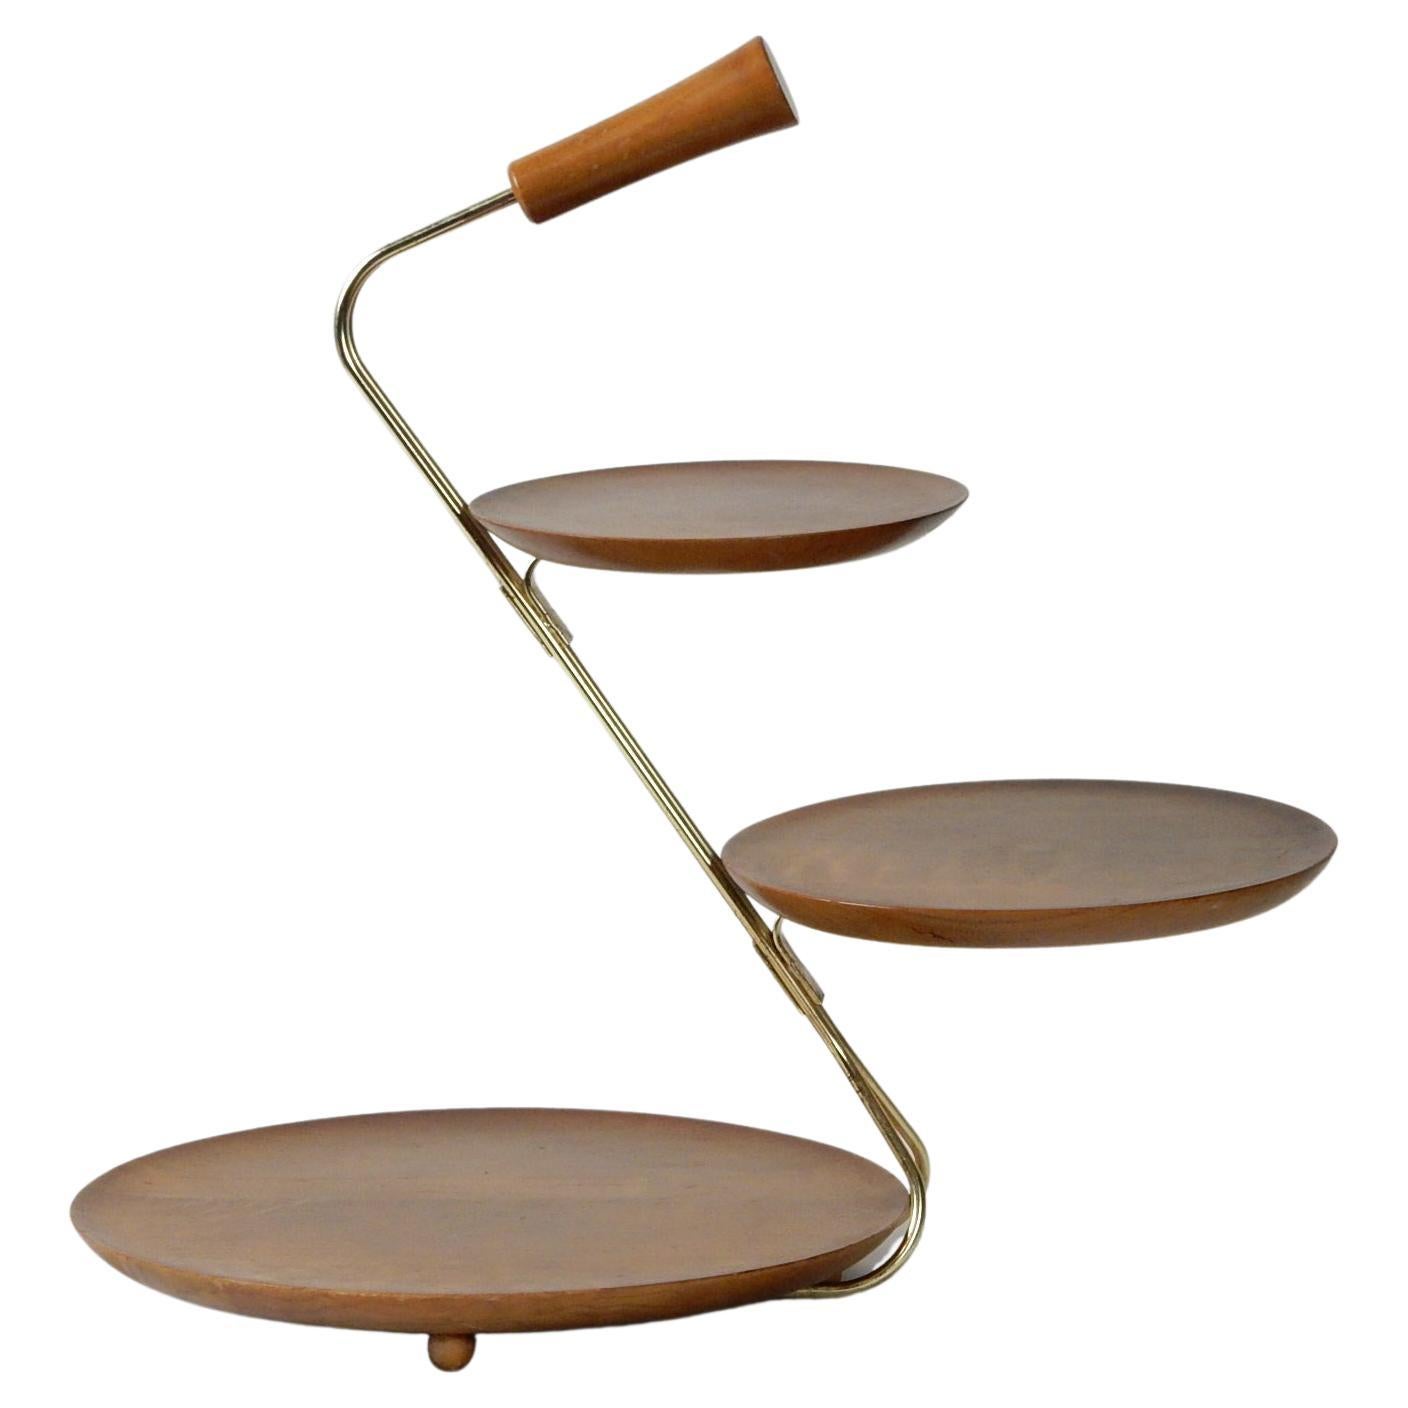 20th Century Mid-Century Modern Tiered Pastry Server Centerpiece Tray For Sale